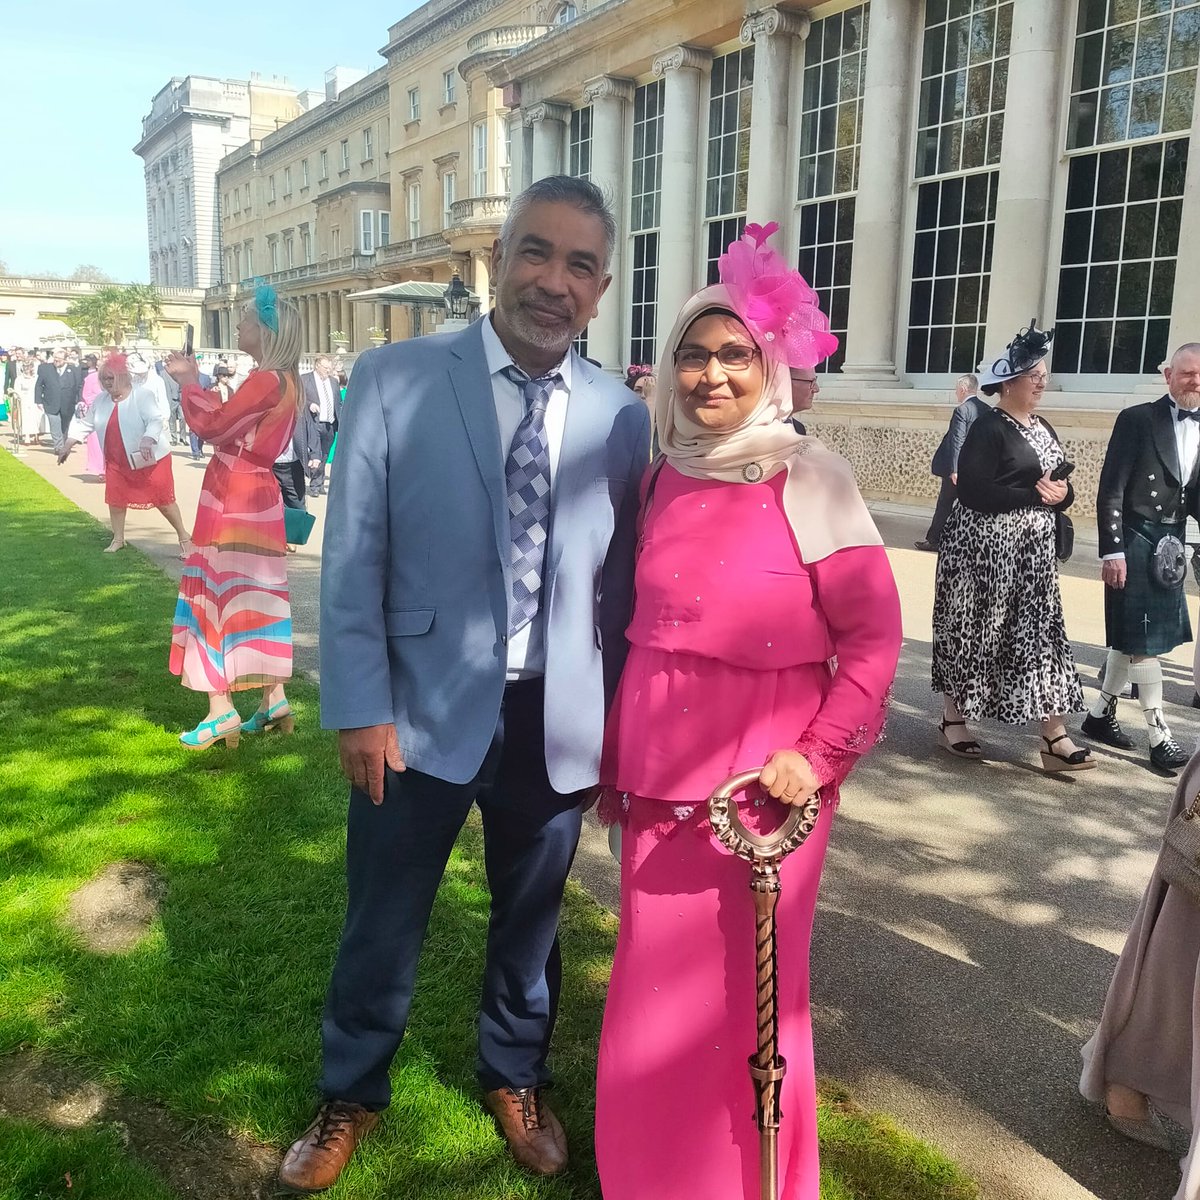 500 extraordinary volunteers were recognised by Their Majesties in the #CoronationChampionsAwards - including our own Dr Nor Aziz!

Nor, Warwick alumna and Regional Fellow, was nominated for her work in Canley.